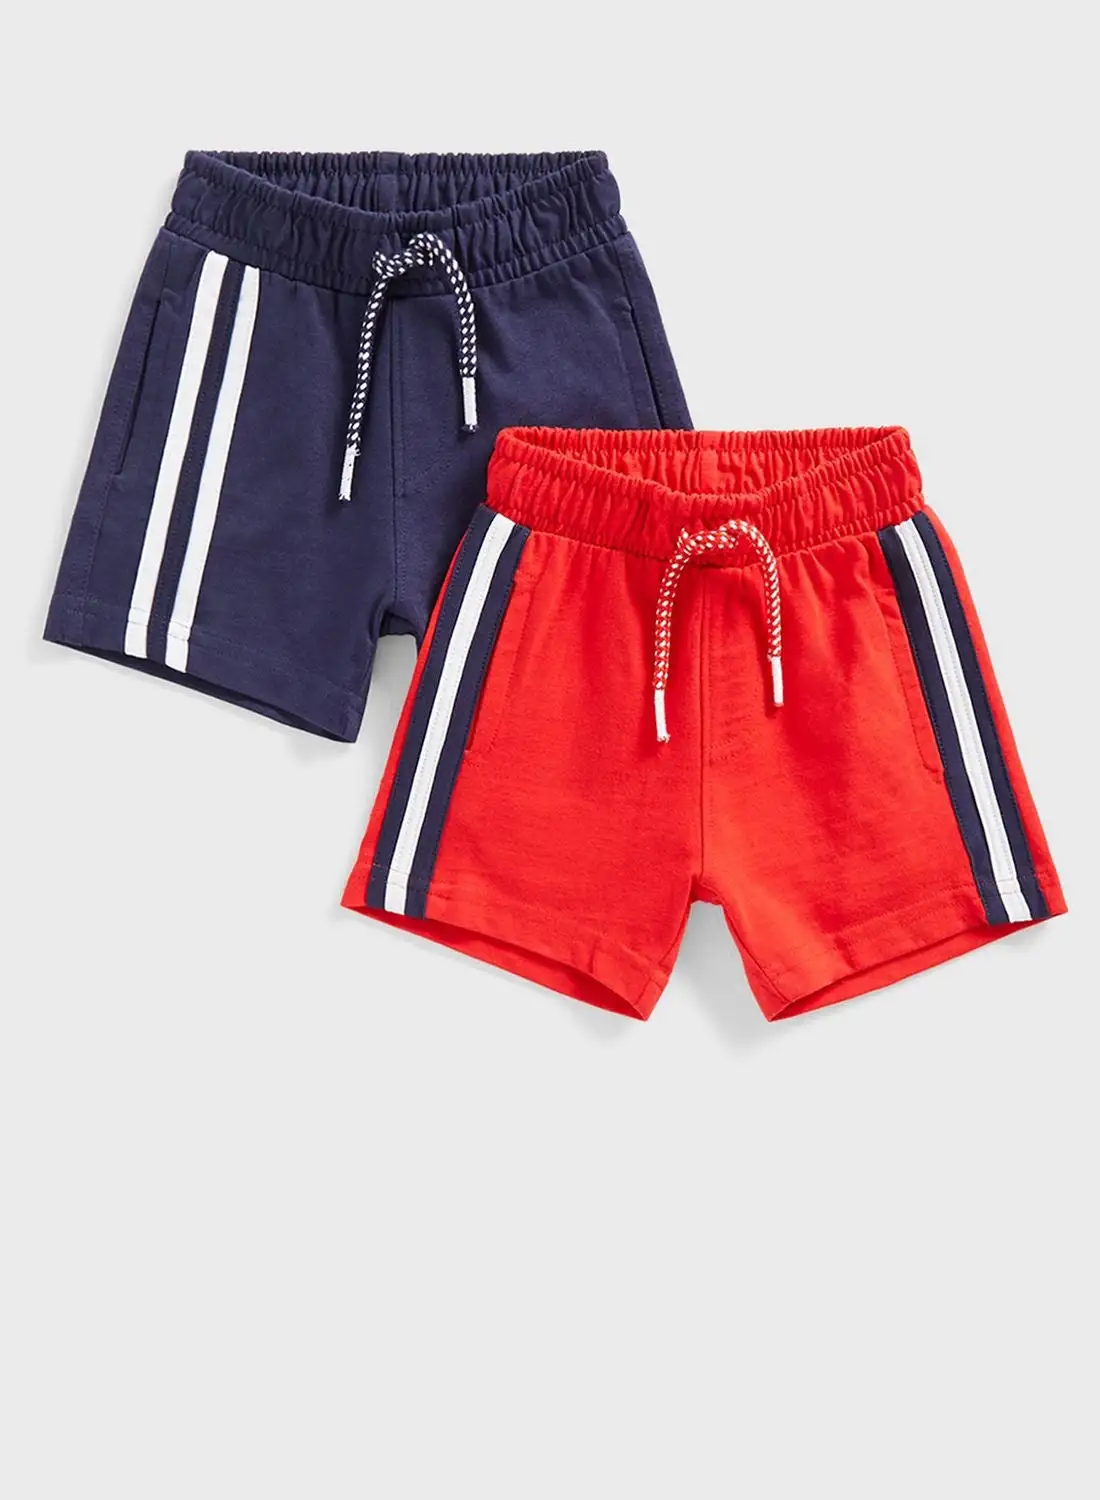 mothercare Kids 2 Pack Essential Shorts